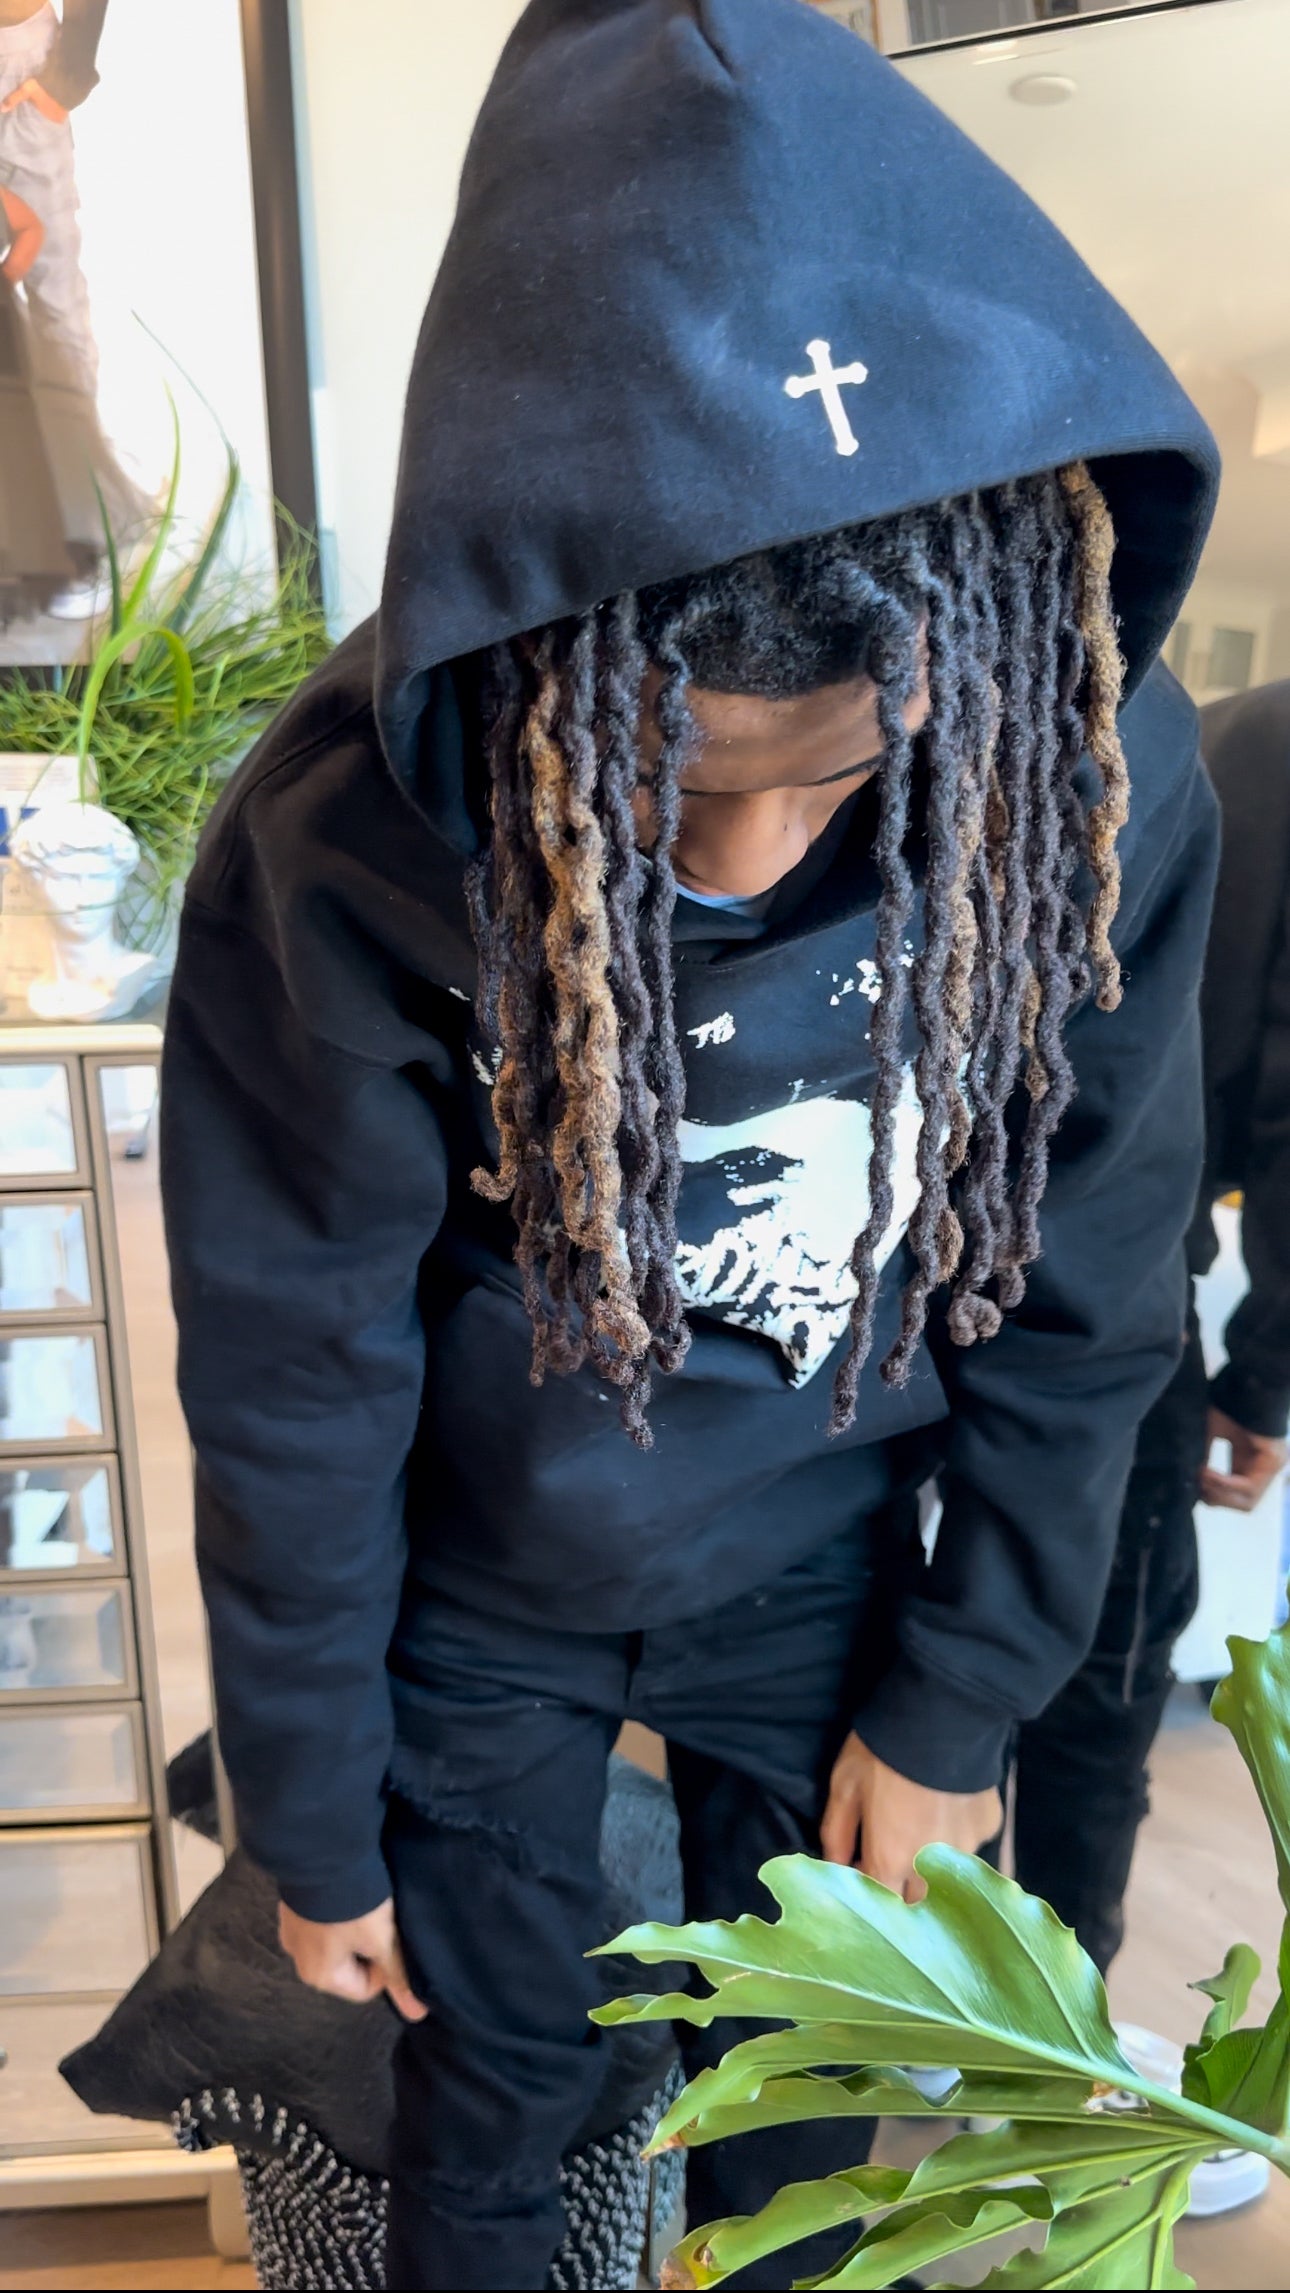 722 Clothing: “Protect Her Neck” Hoodie